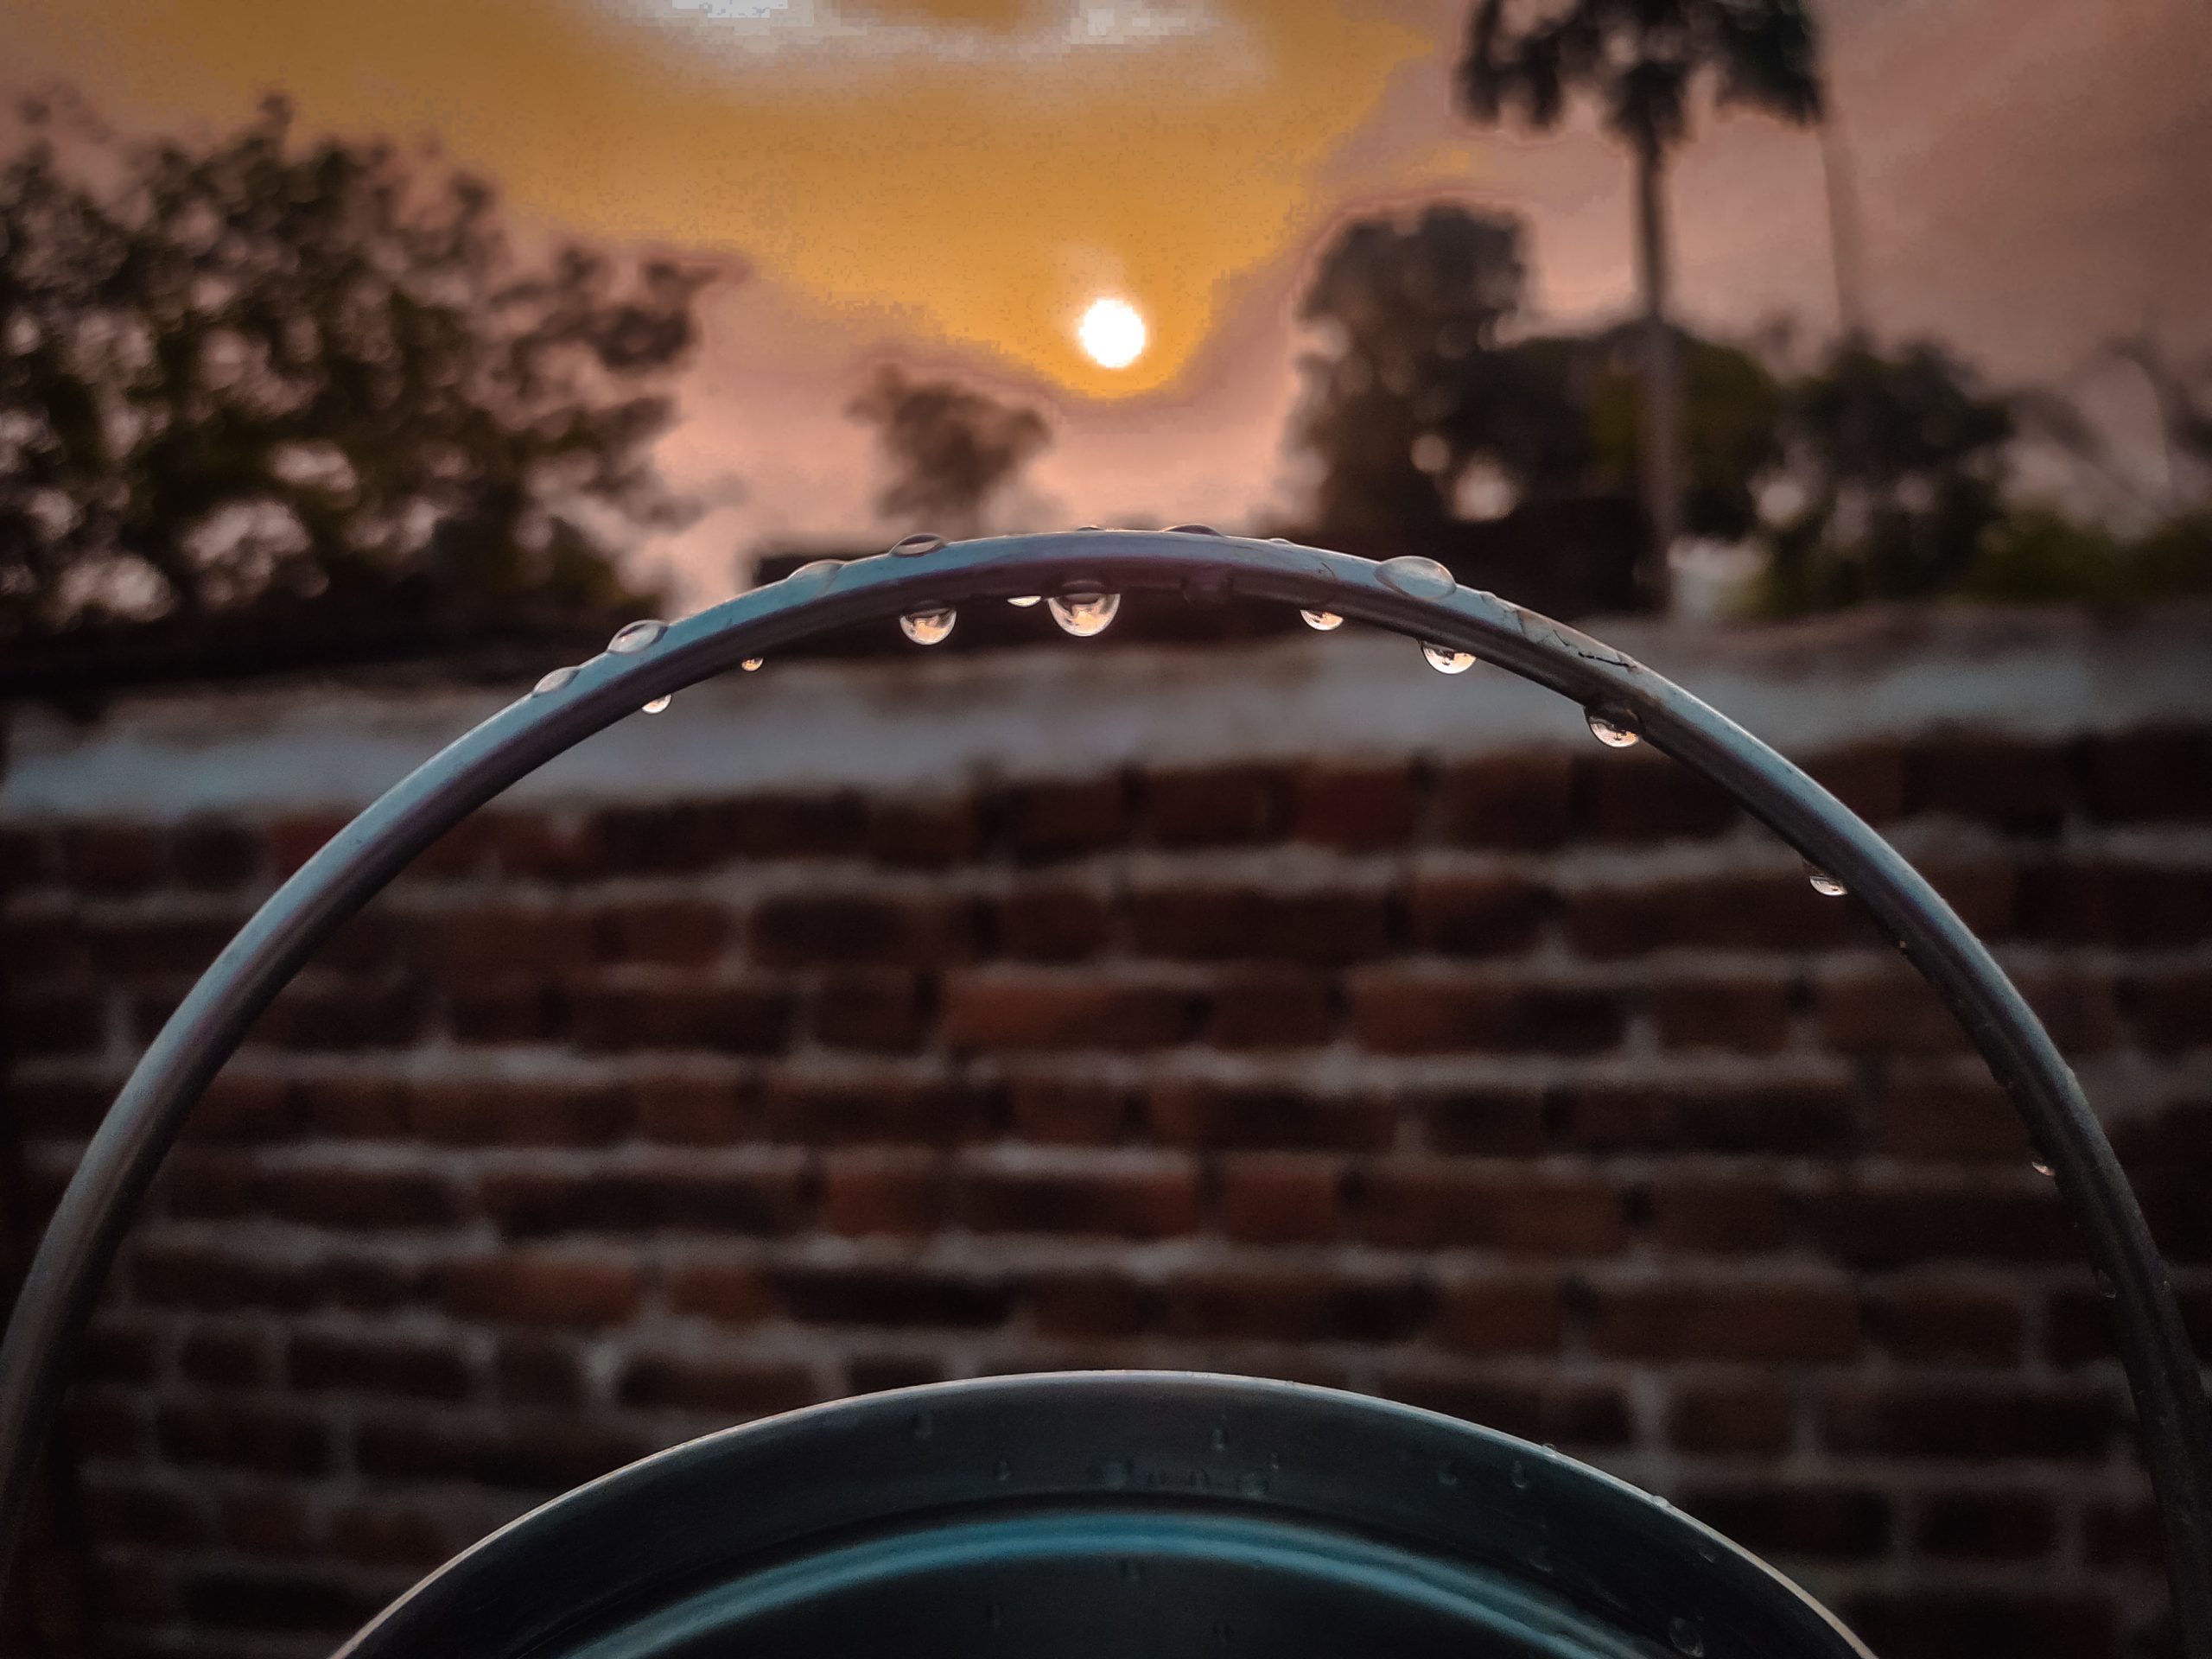 Sunset and water drops on a ring